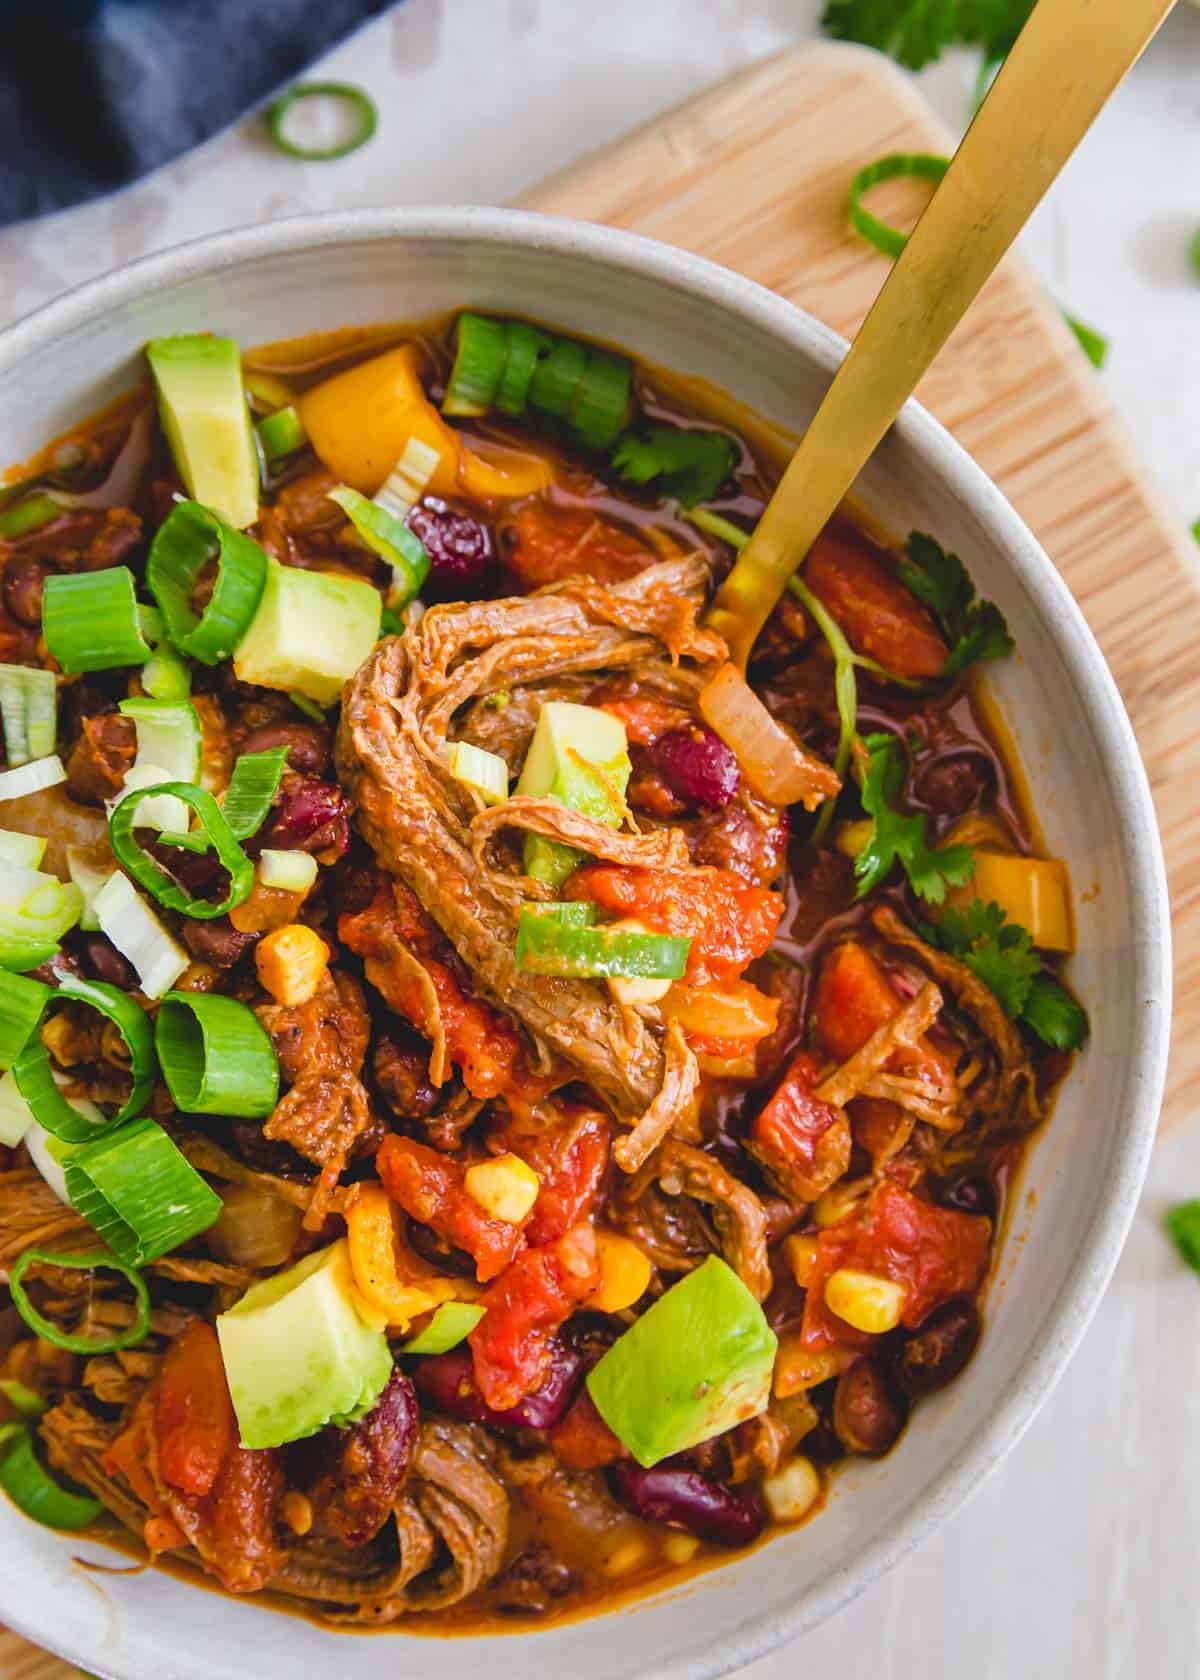 Brisket chili is a comforting, hearty meal perfect for using up leftover beef brisket in a cozy chili filled with beans, peppers and corn and a thick tomato base. 